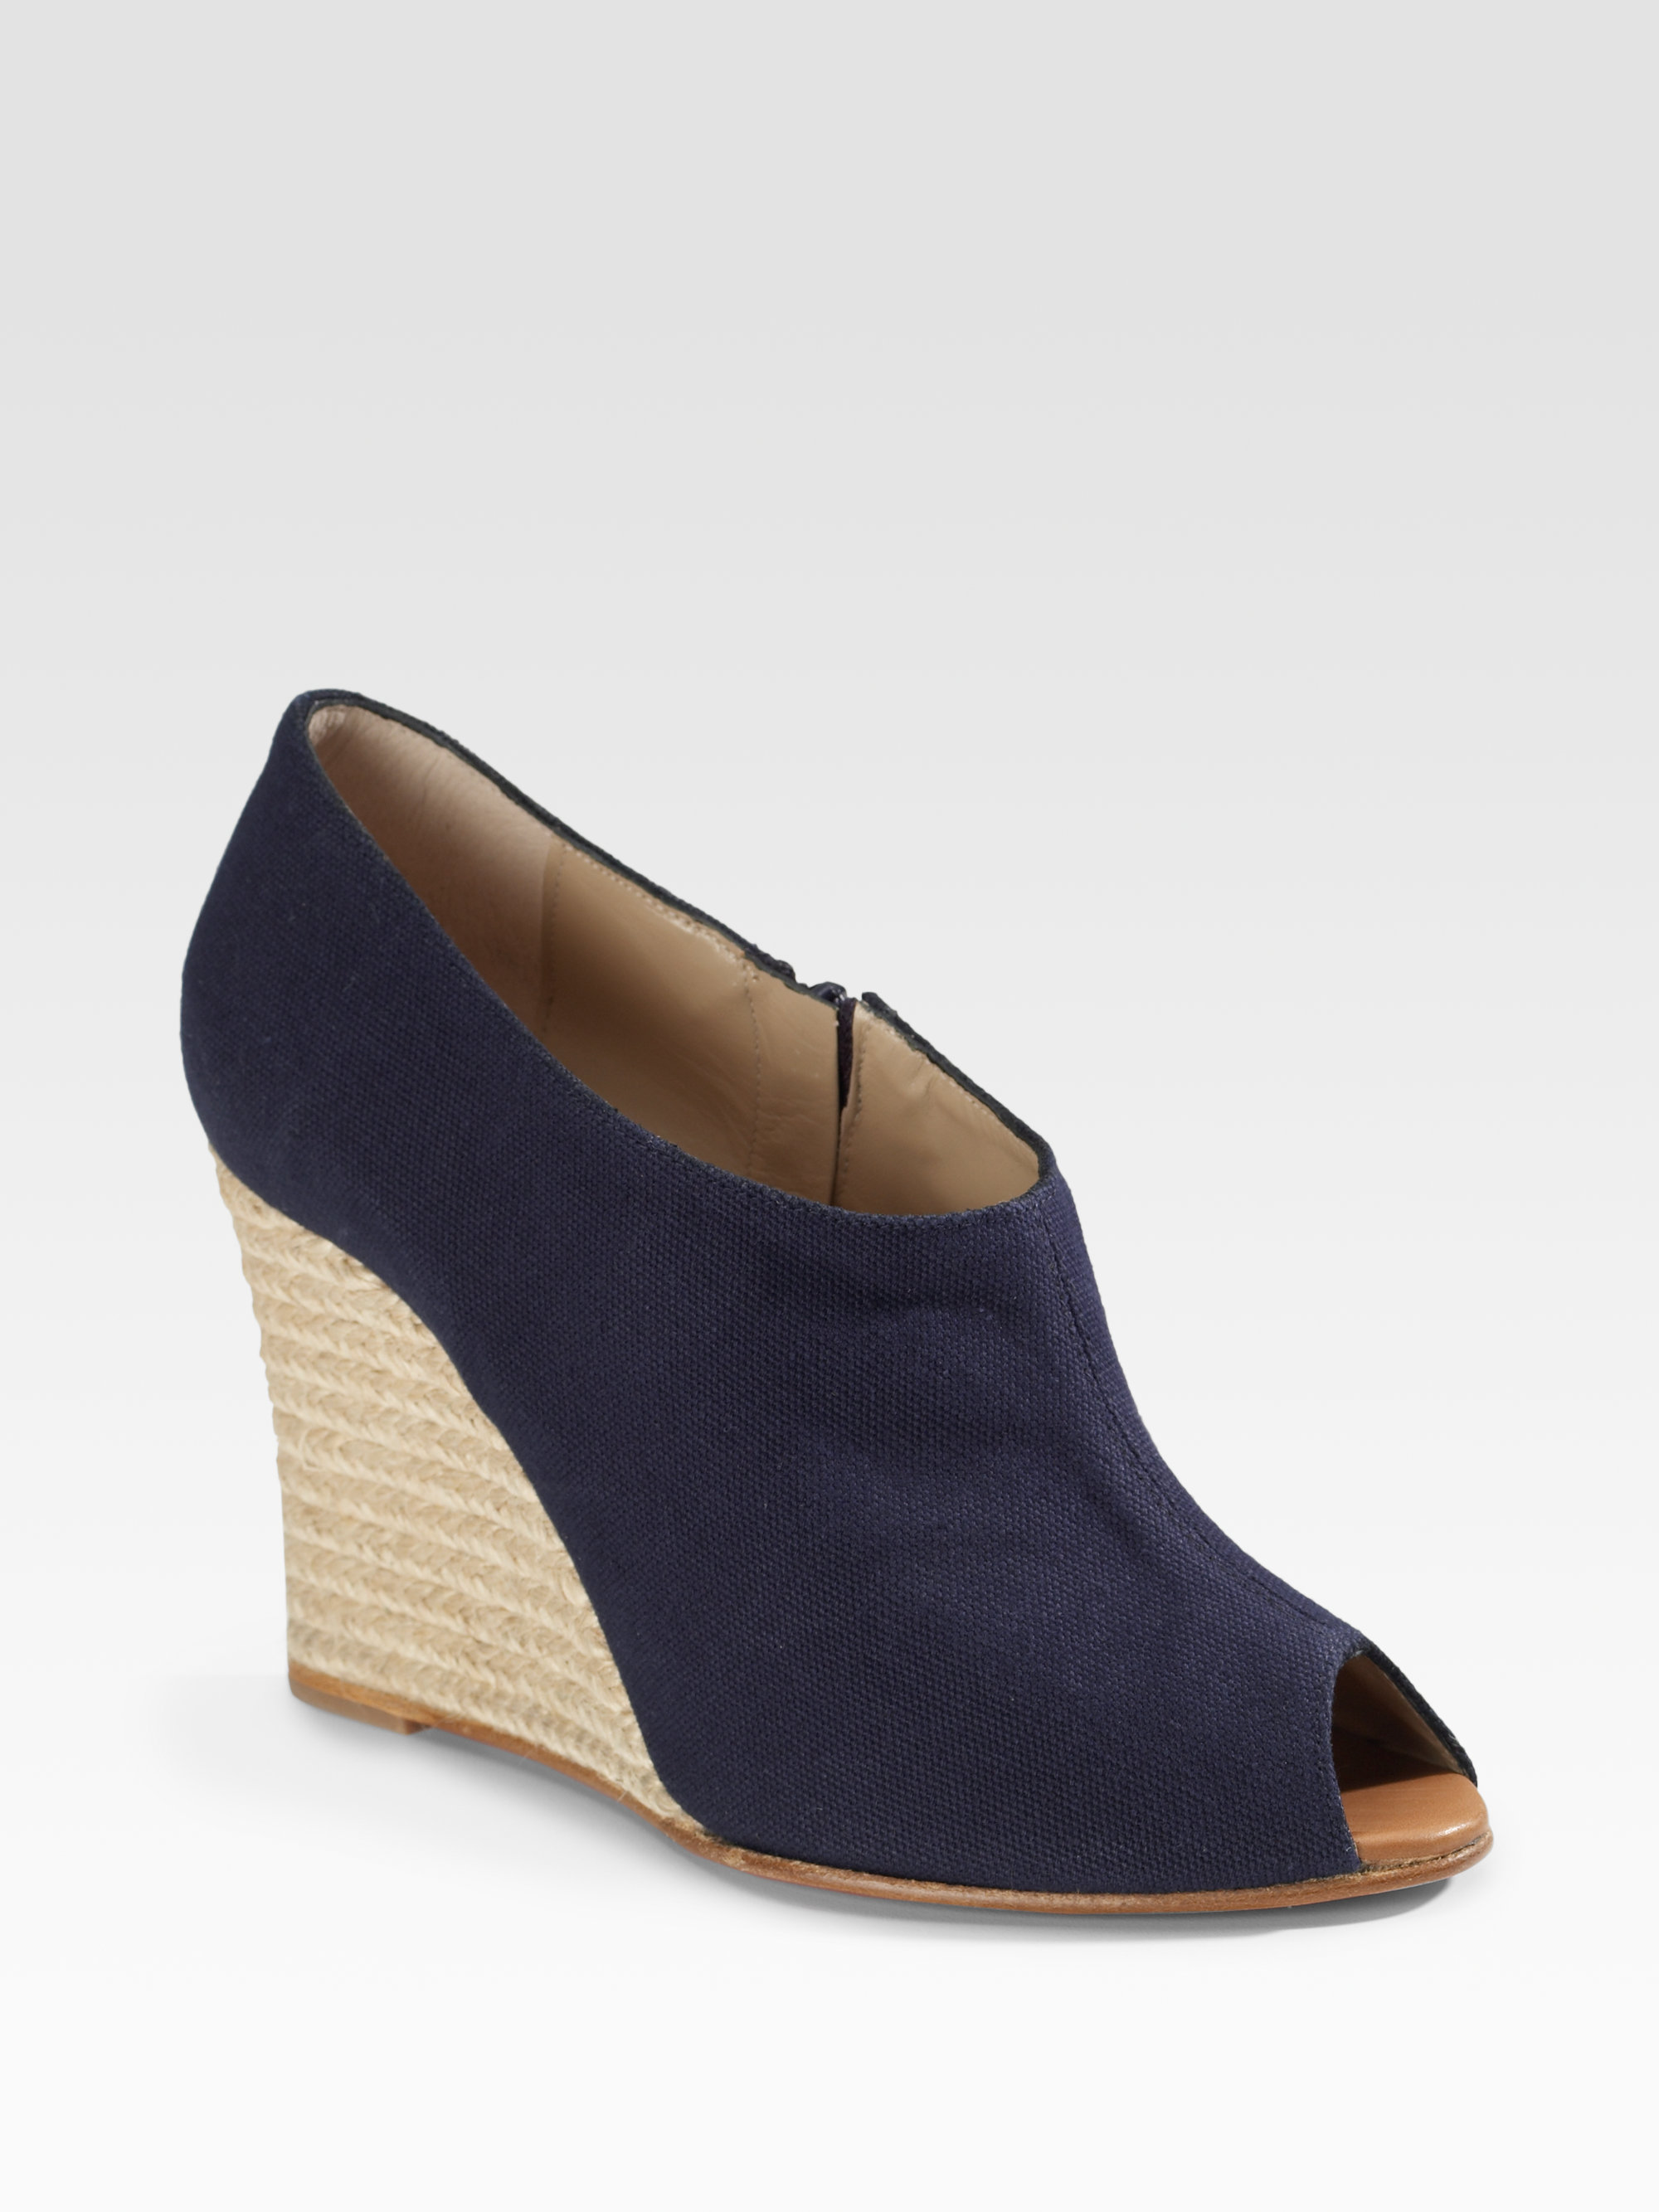 christian louboutin men loafers - Christian louboutin Corazon Covered Wedge Espadrilles in Blue ...